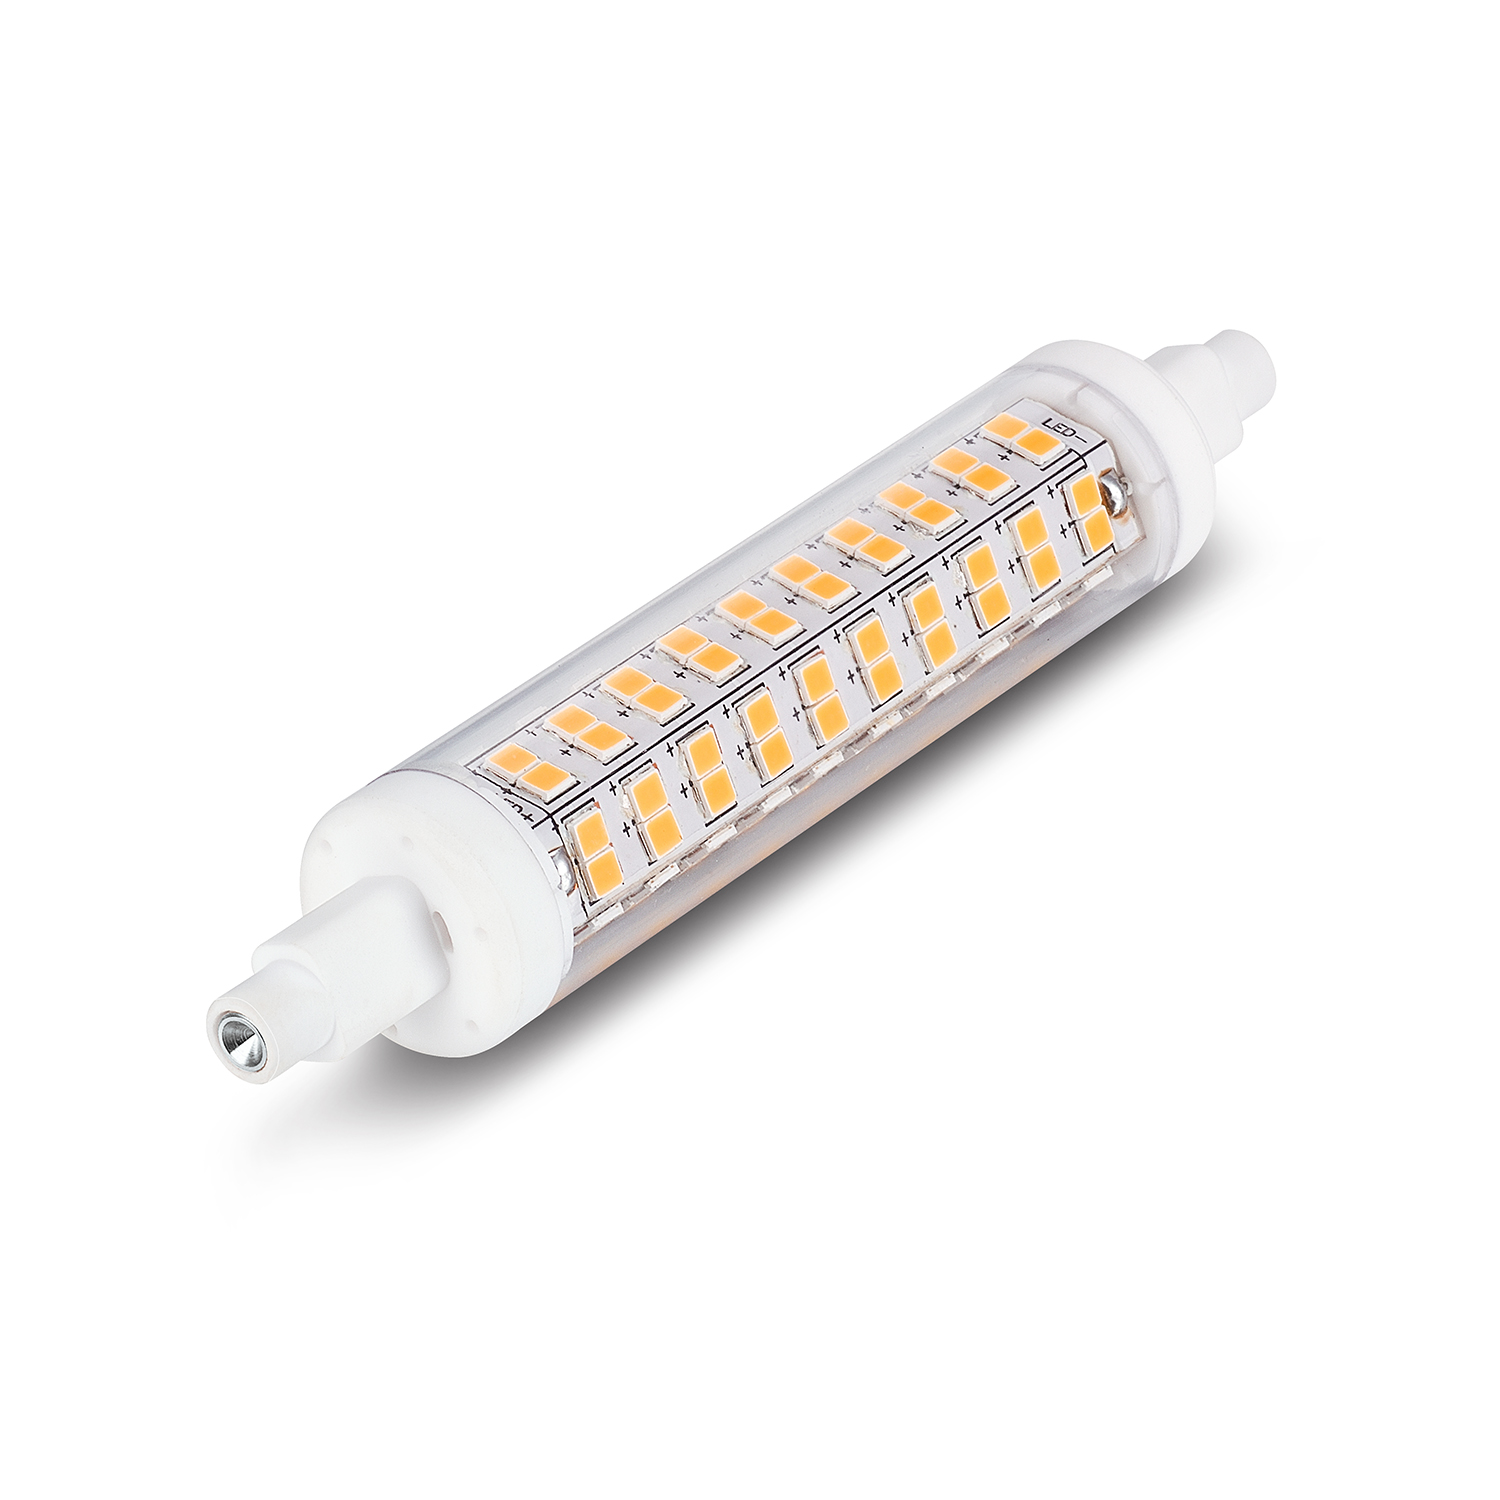 Trouw bescherming van nu af aan LumenBasic R7S LED 118mm Bulb J118 10w Double Ended J Type LED Replacement  for Halogen Flood Lamp 100w Equal Pack of 2 - LumenBasic